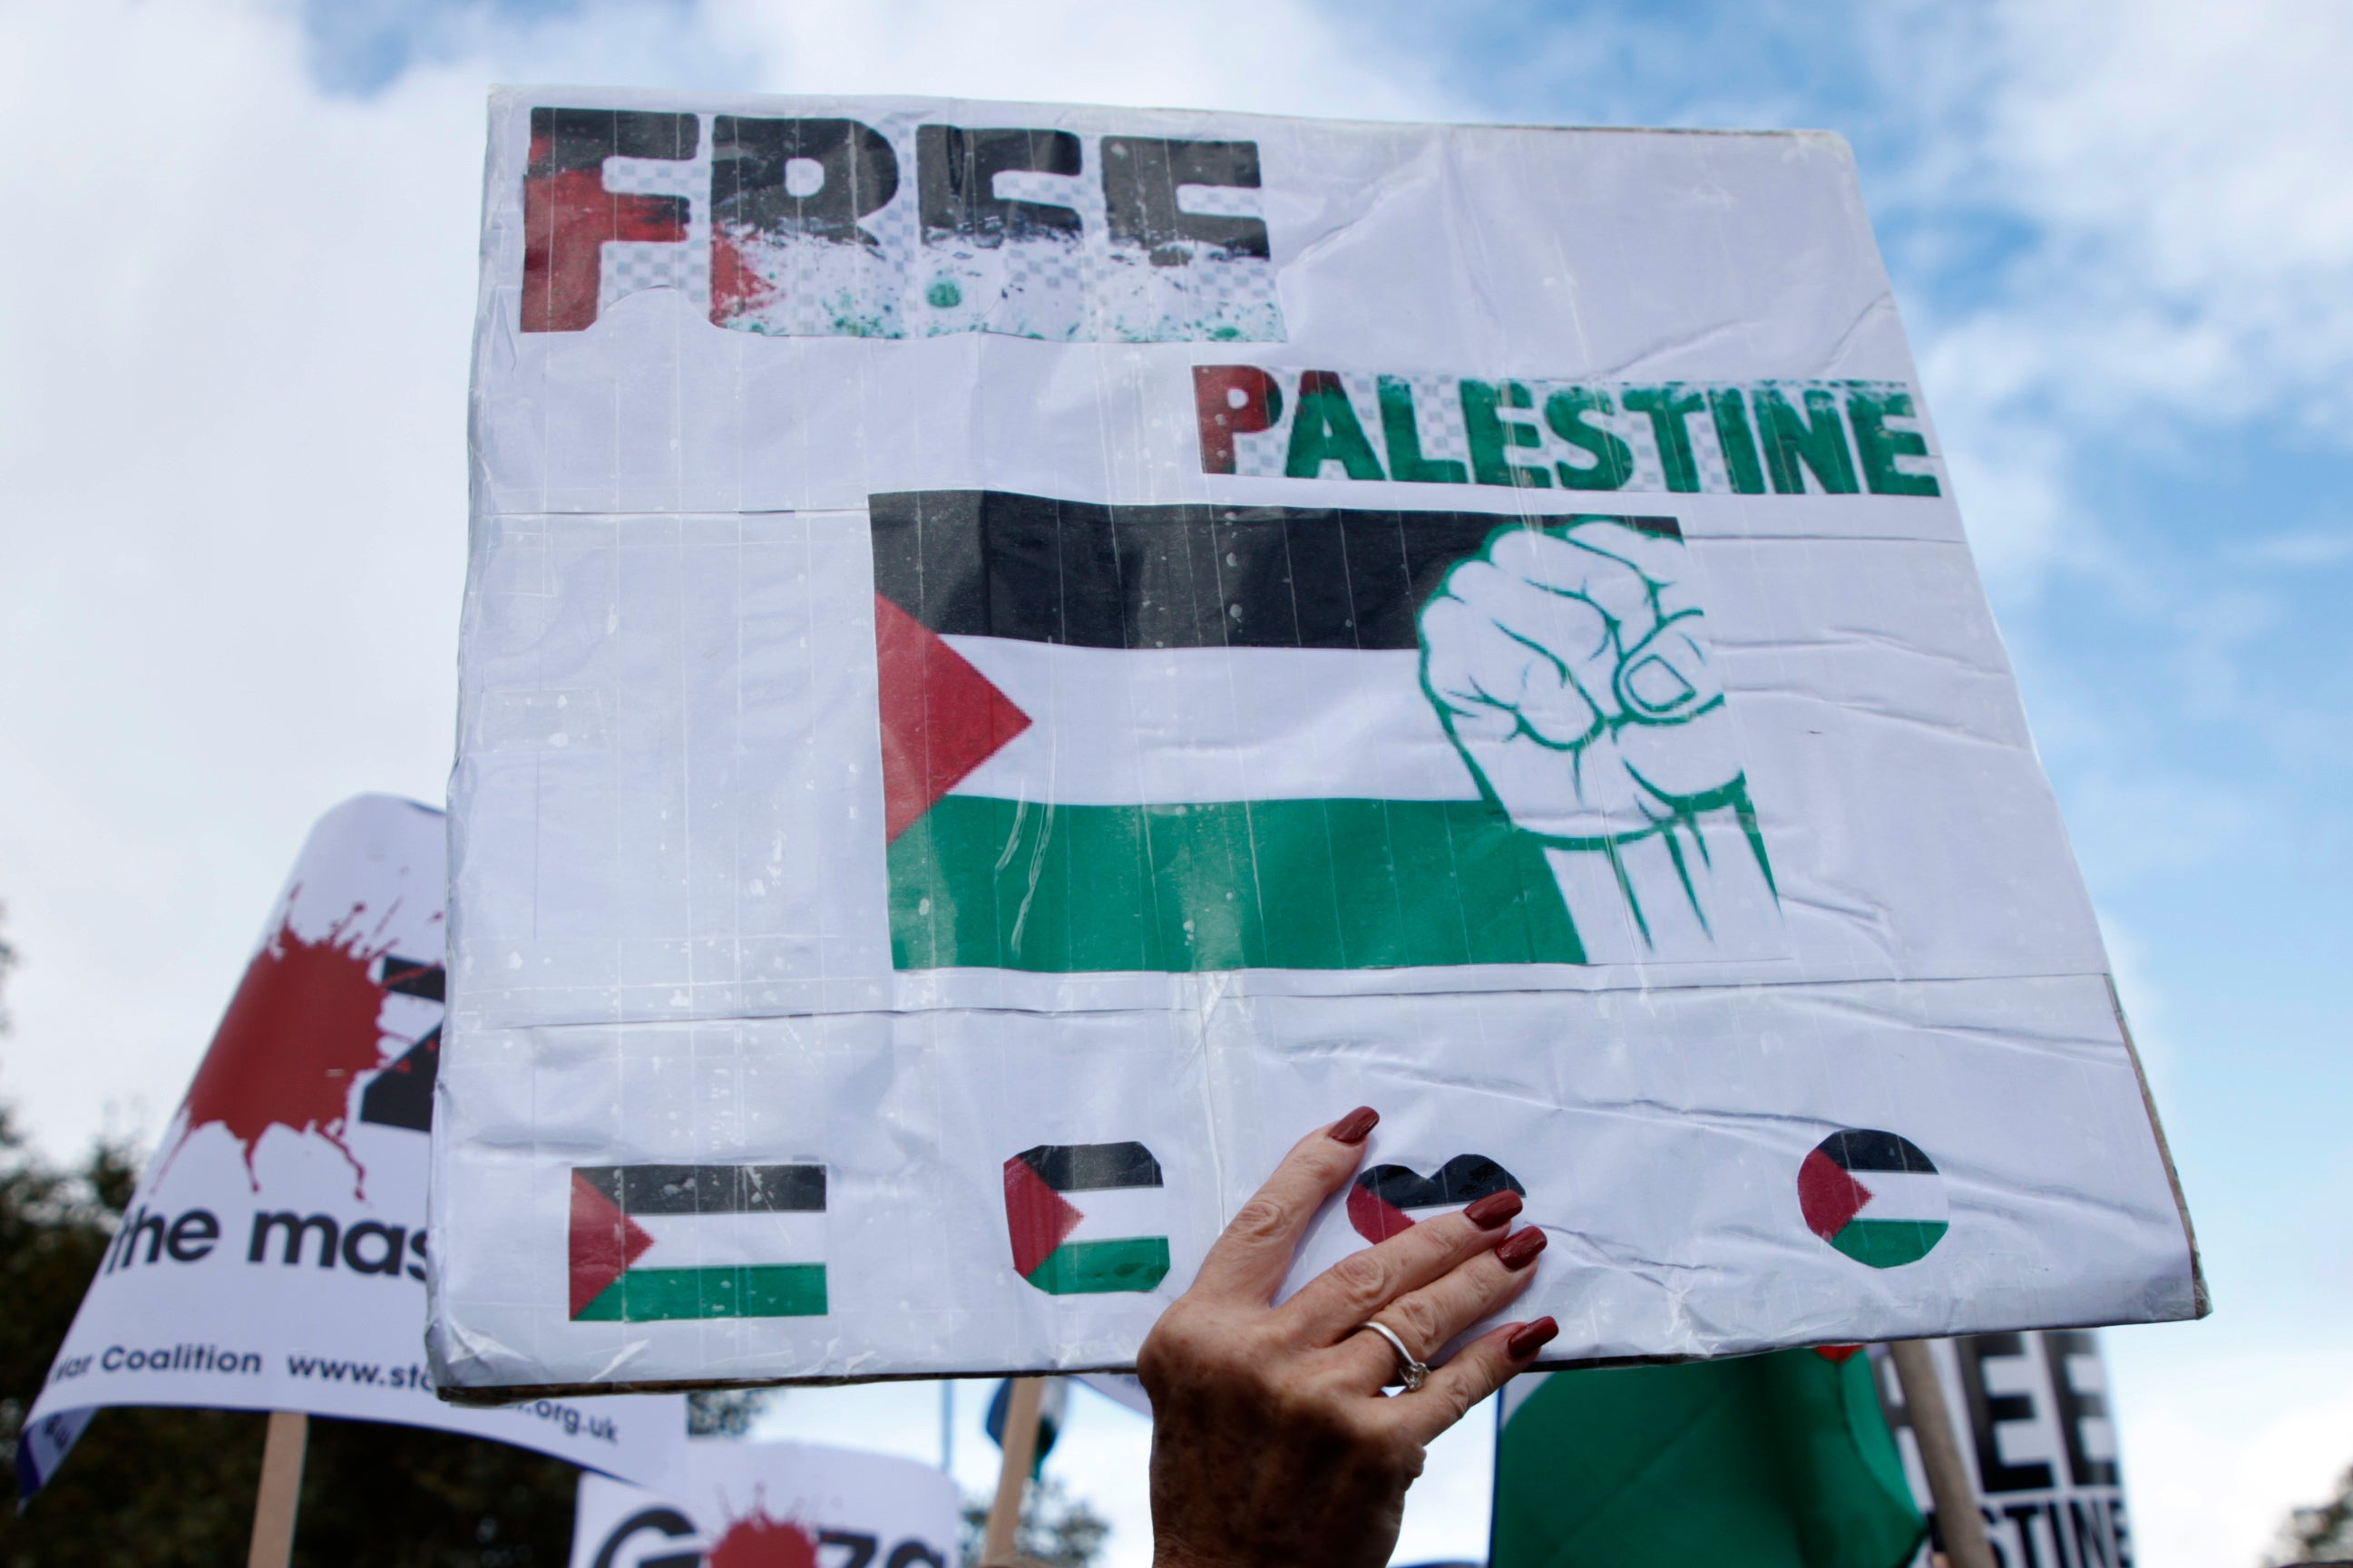 Demonstrators hold up flags and placards during a pro-Palestinian march in London